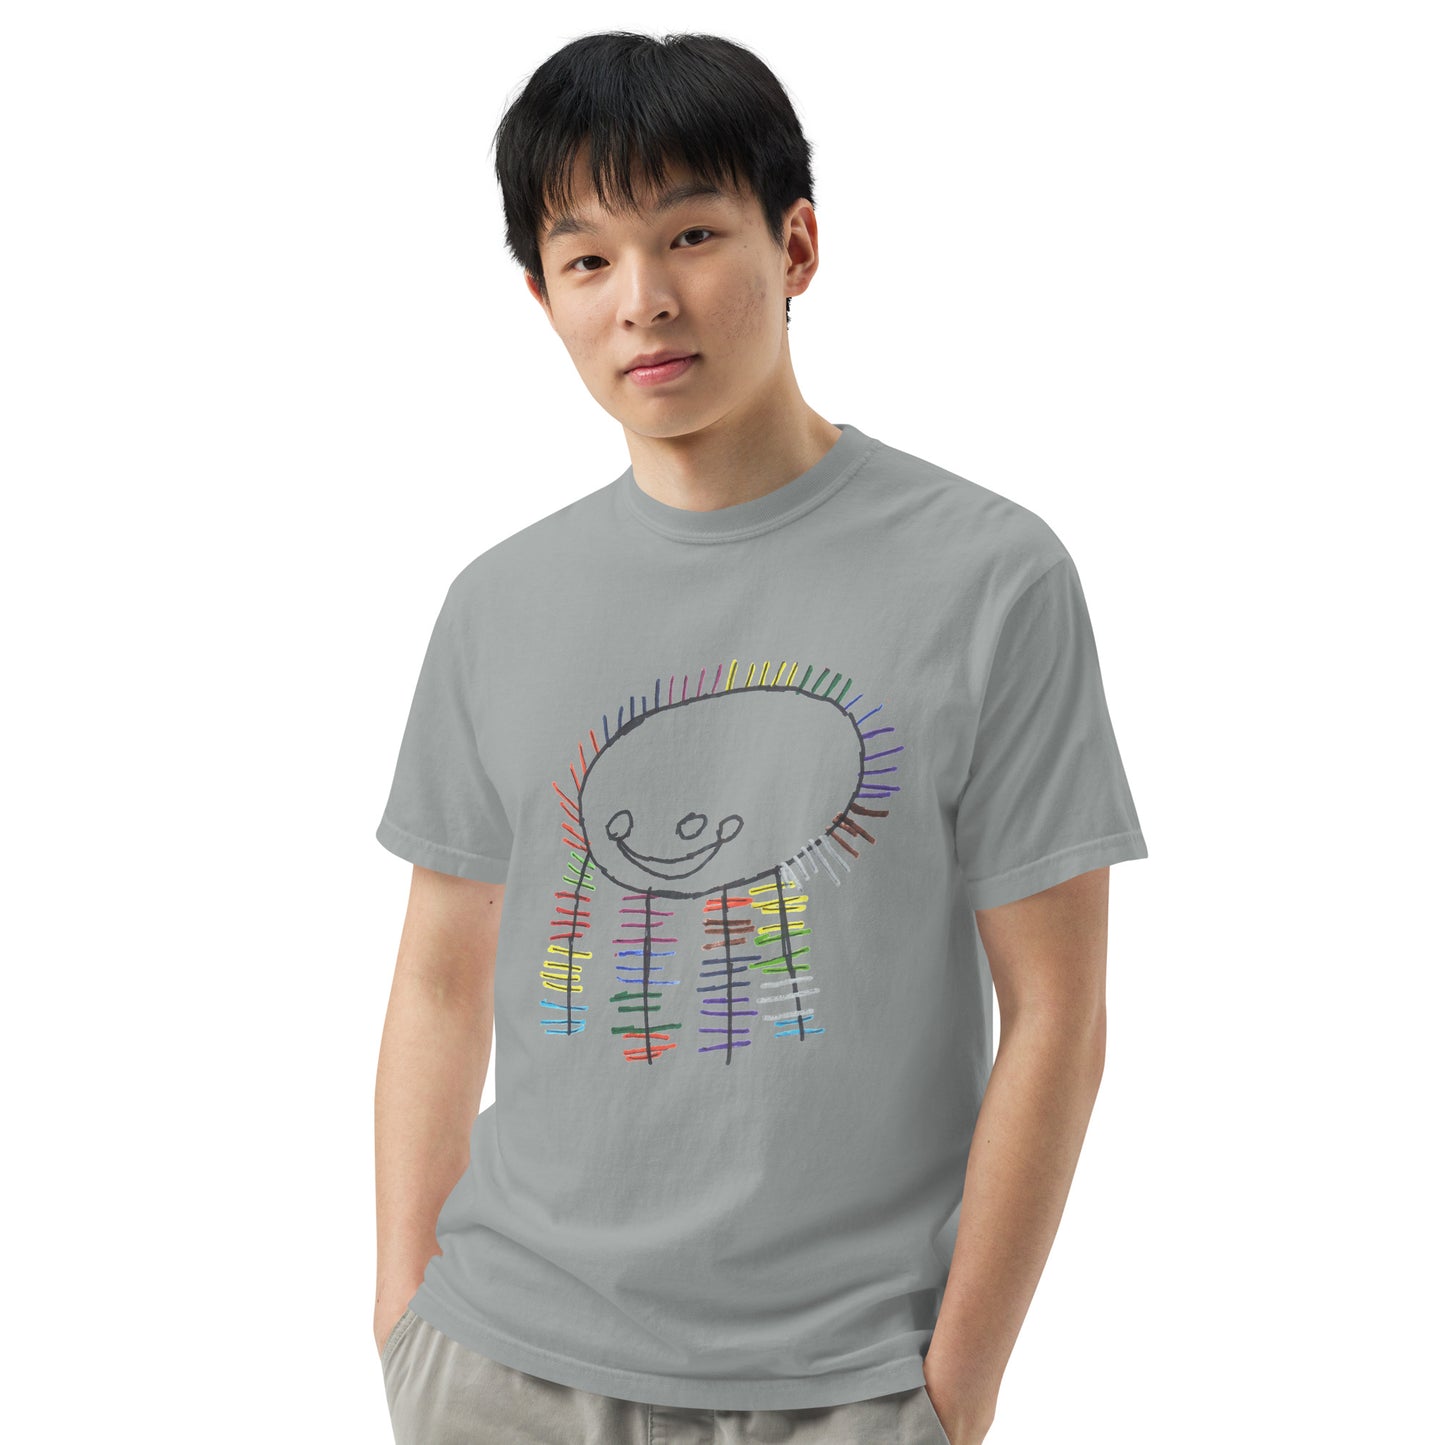 Men's tee - "Me and My Markers"